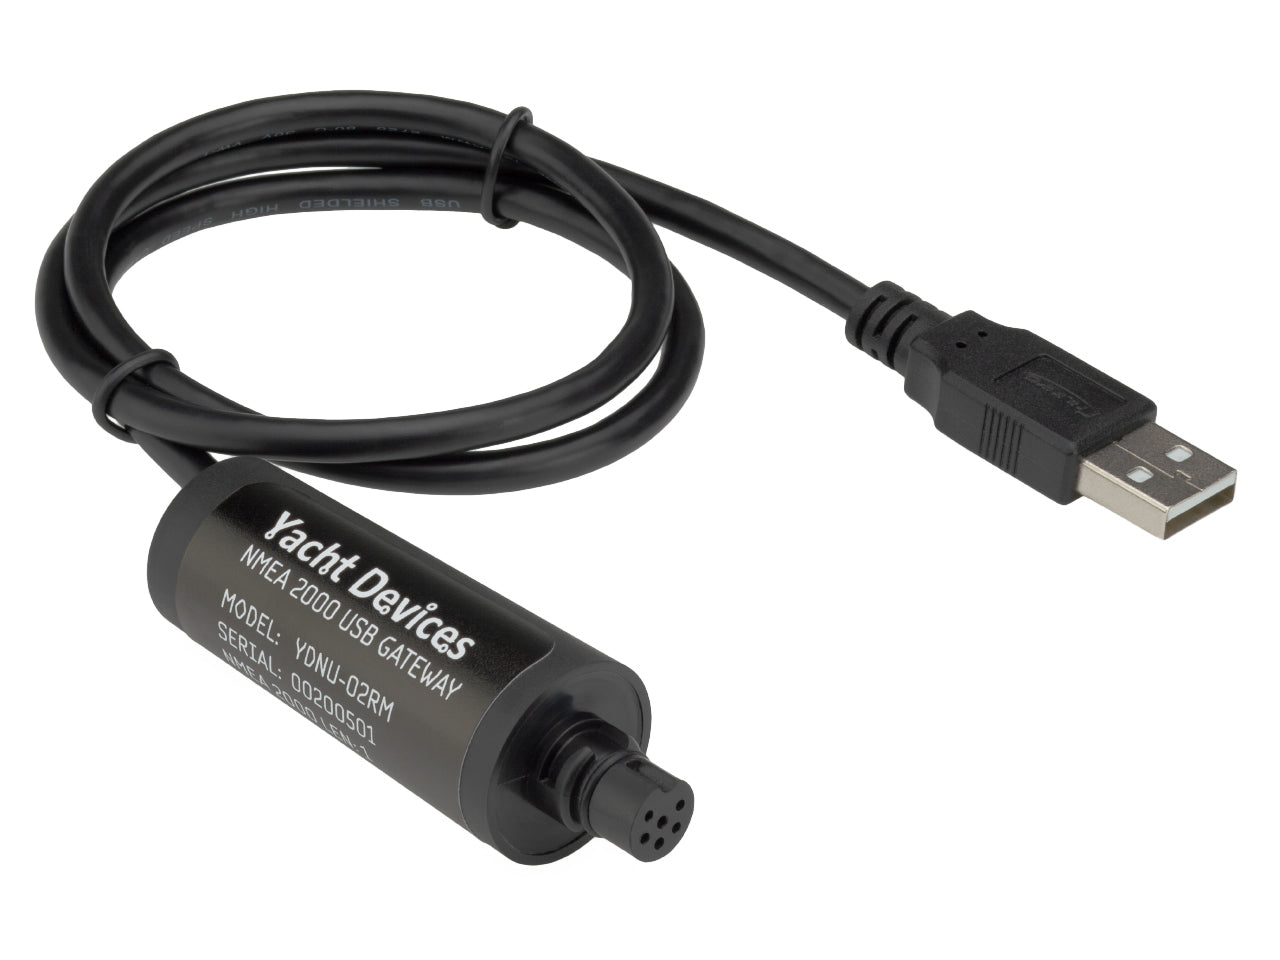 NMEA 2000 USB Gateway YDNU-02 - Compatible with Raymarine SeaTalk NG, model with USB Type A Female connector - 2 Dogs Marine